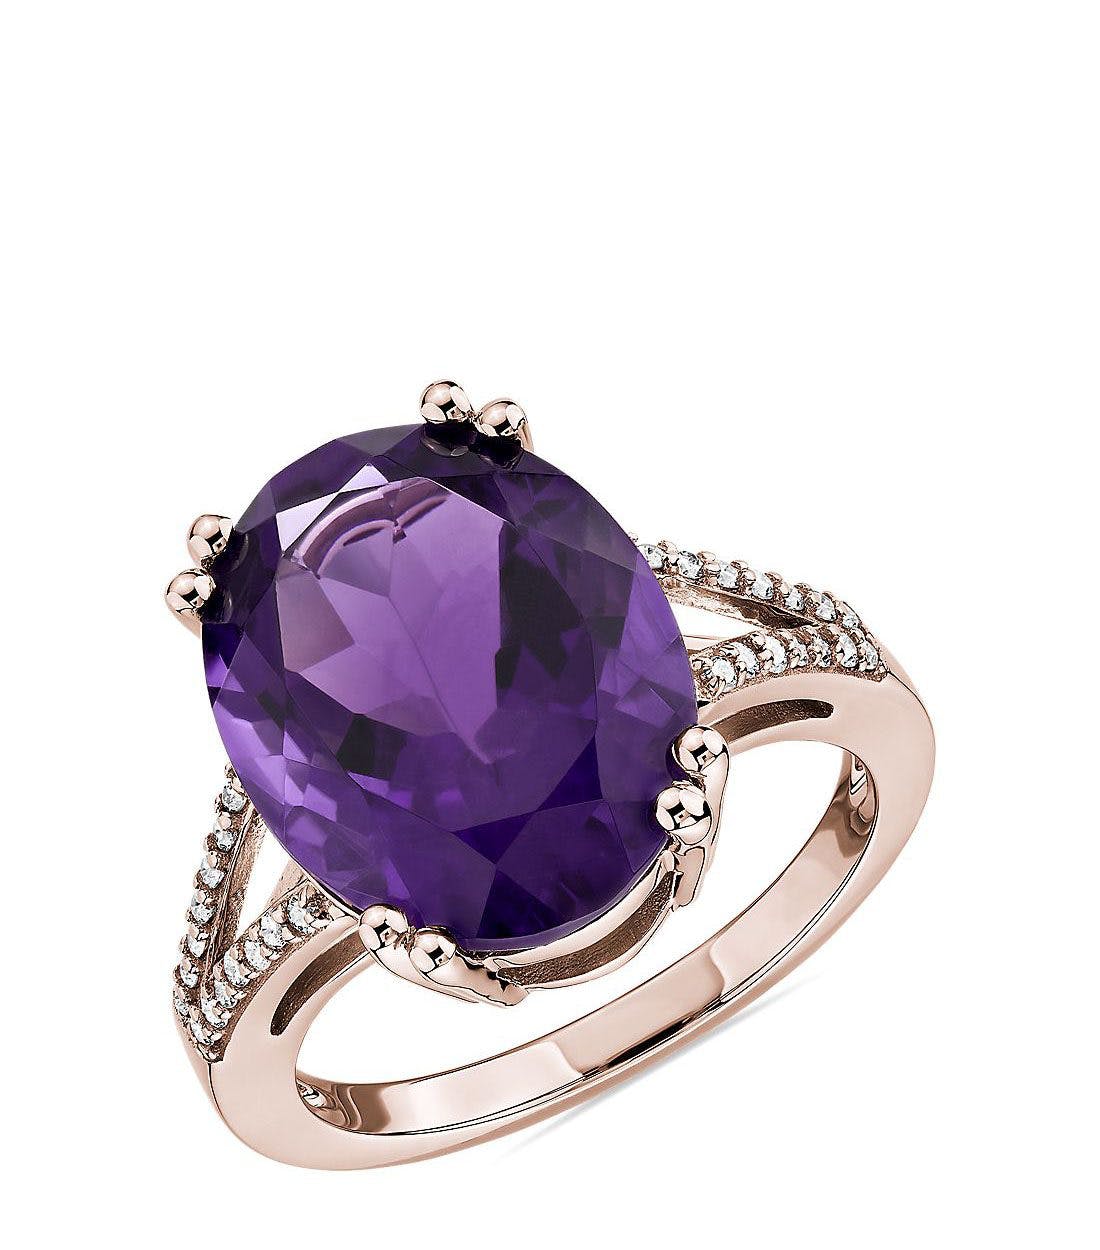 Oval Amethyst Statement Ring in 14k Rose Gold Blue Nile